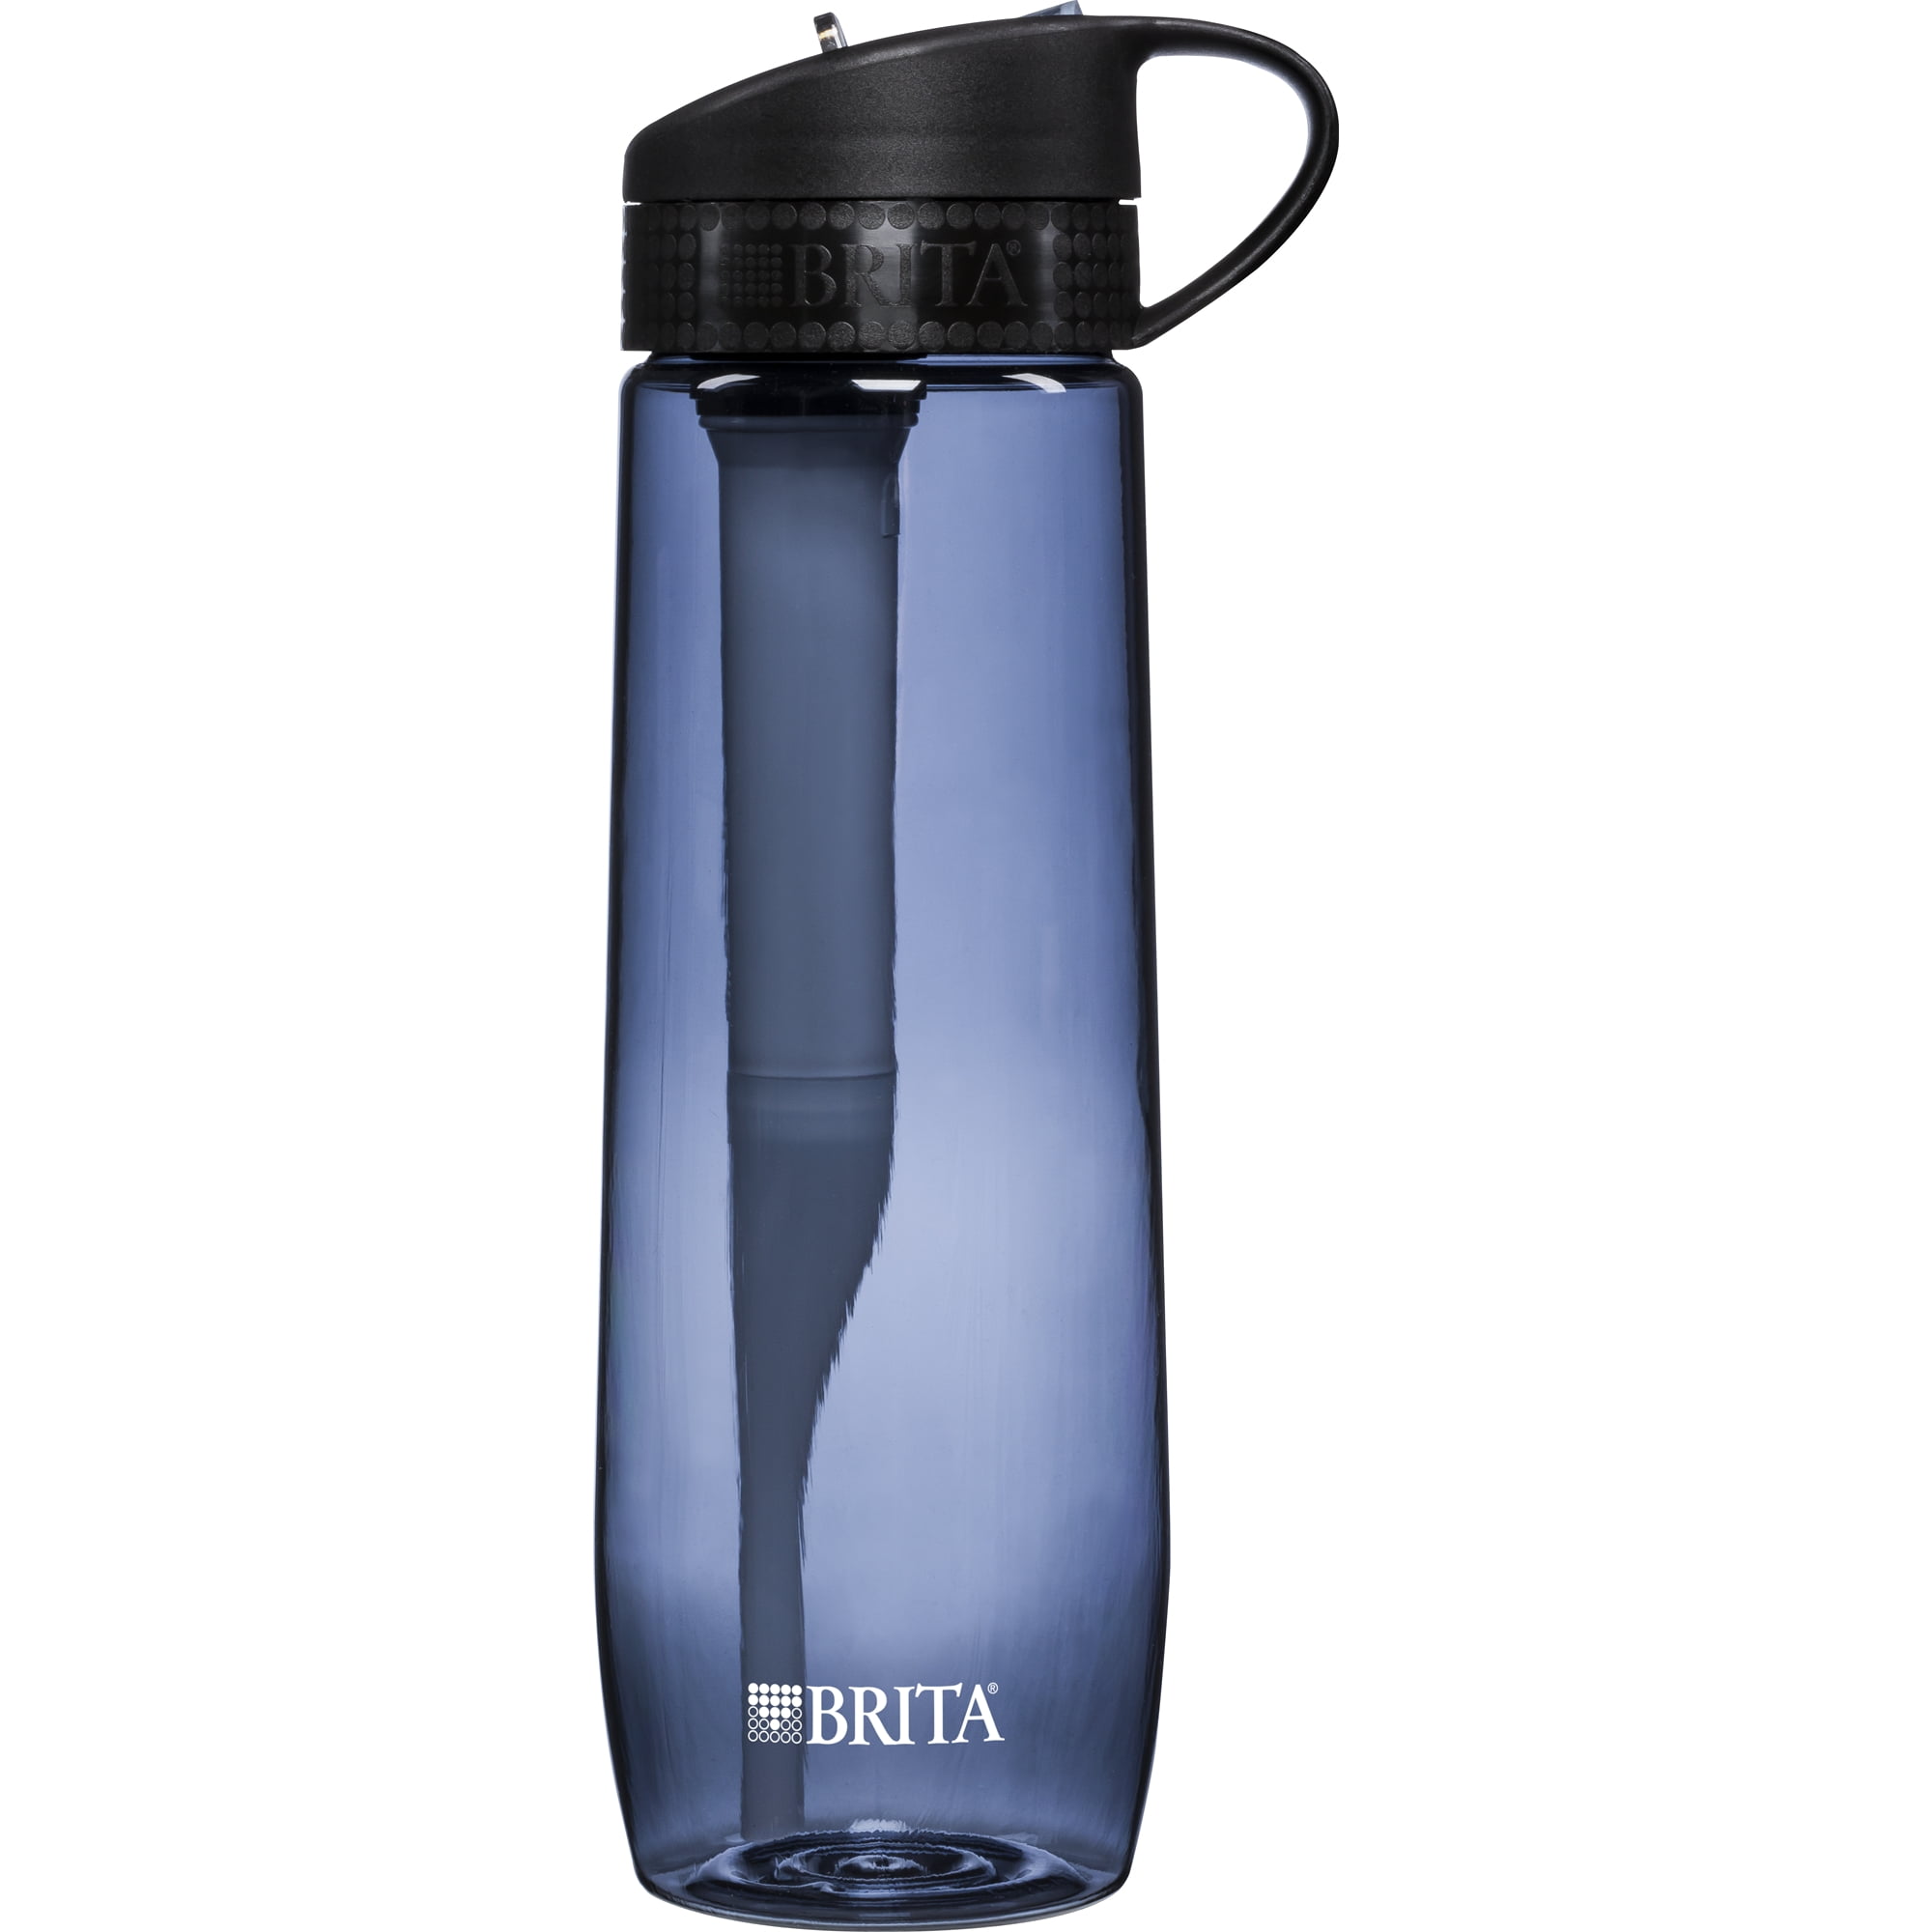 Brita BLUE FLORAL Hard Sided WATER BOTTLE with FILTER 23.7 Oz NEW